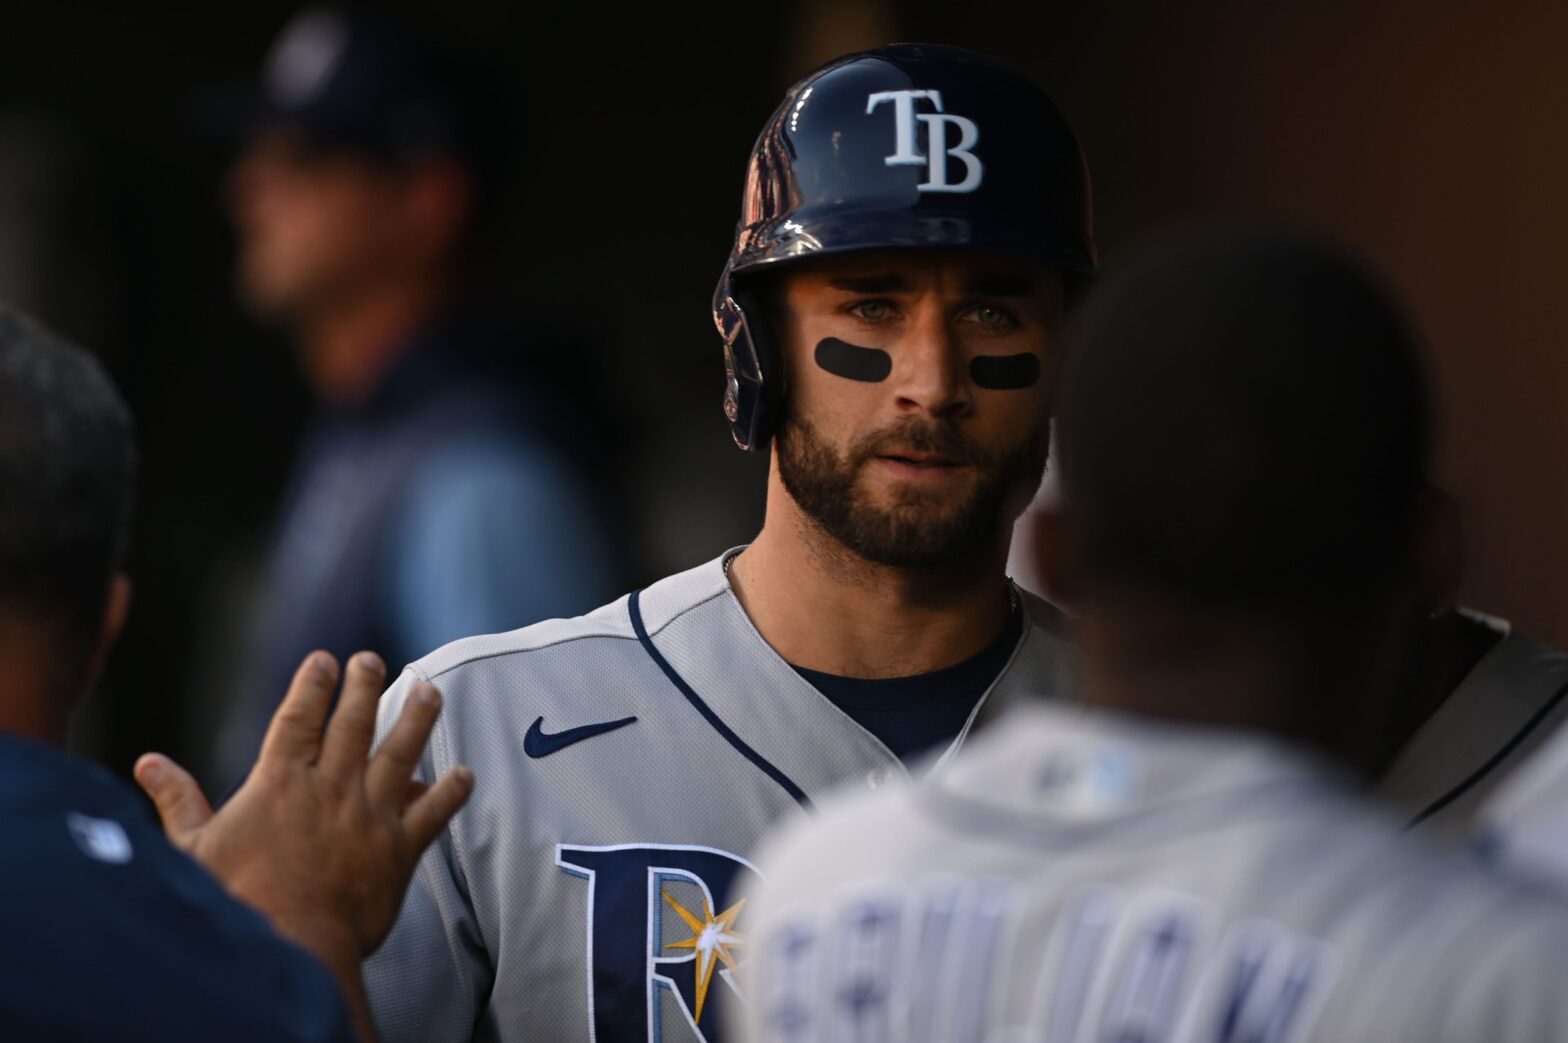 Kevin Kiermaier Leaves Early Monday With Hip Issue